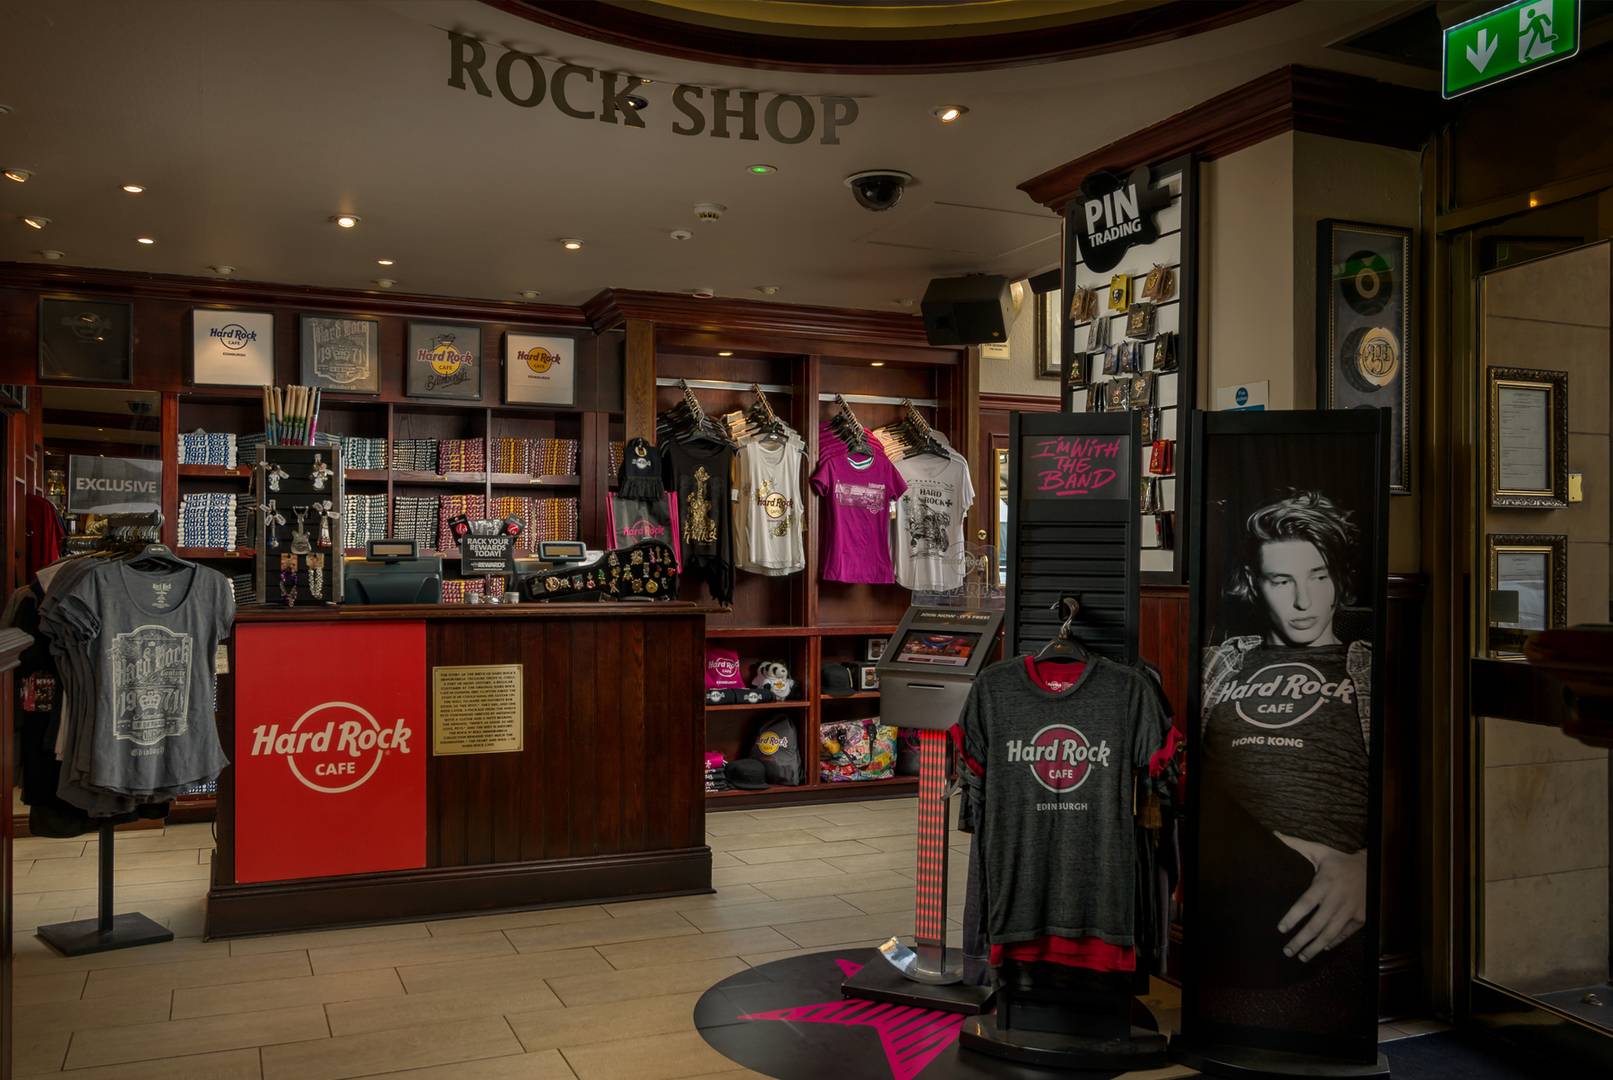 Rock Shop, featuring limited edition and city-specific souvenirs not available online,  ©2023 Hard Rock International (USA), Inc. All rights reserved.